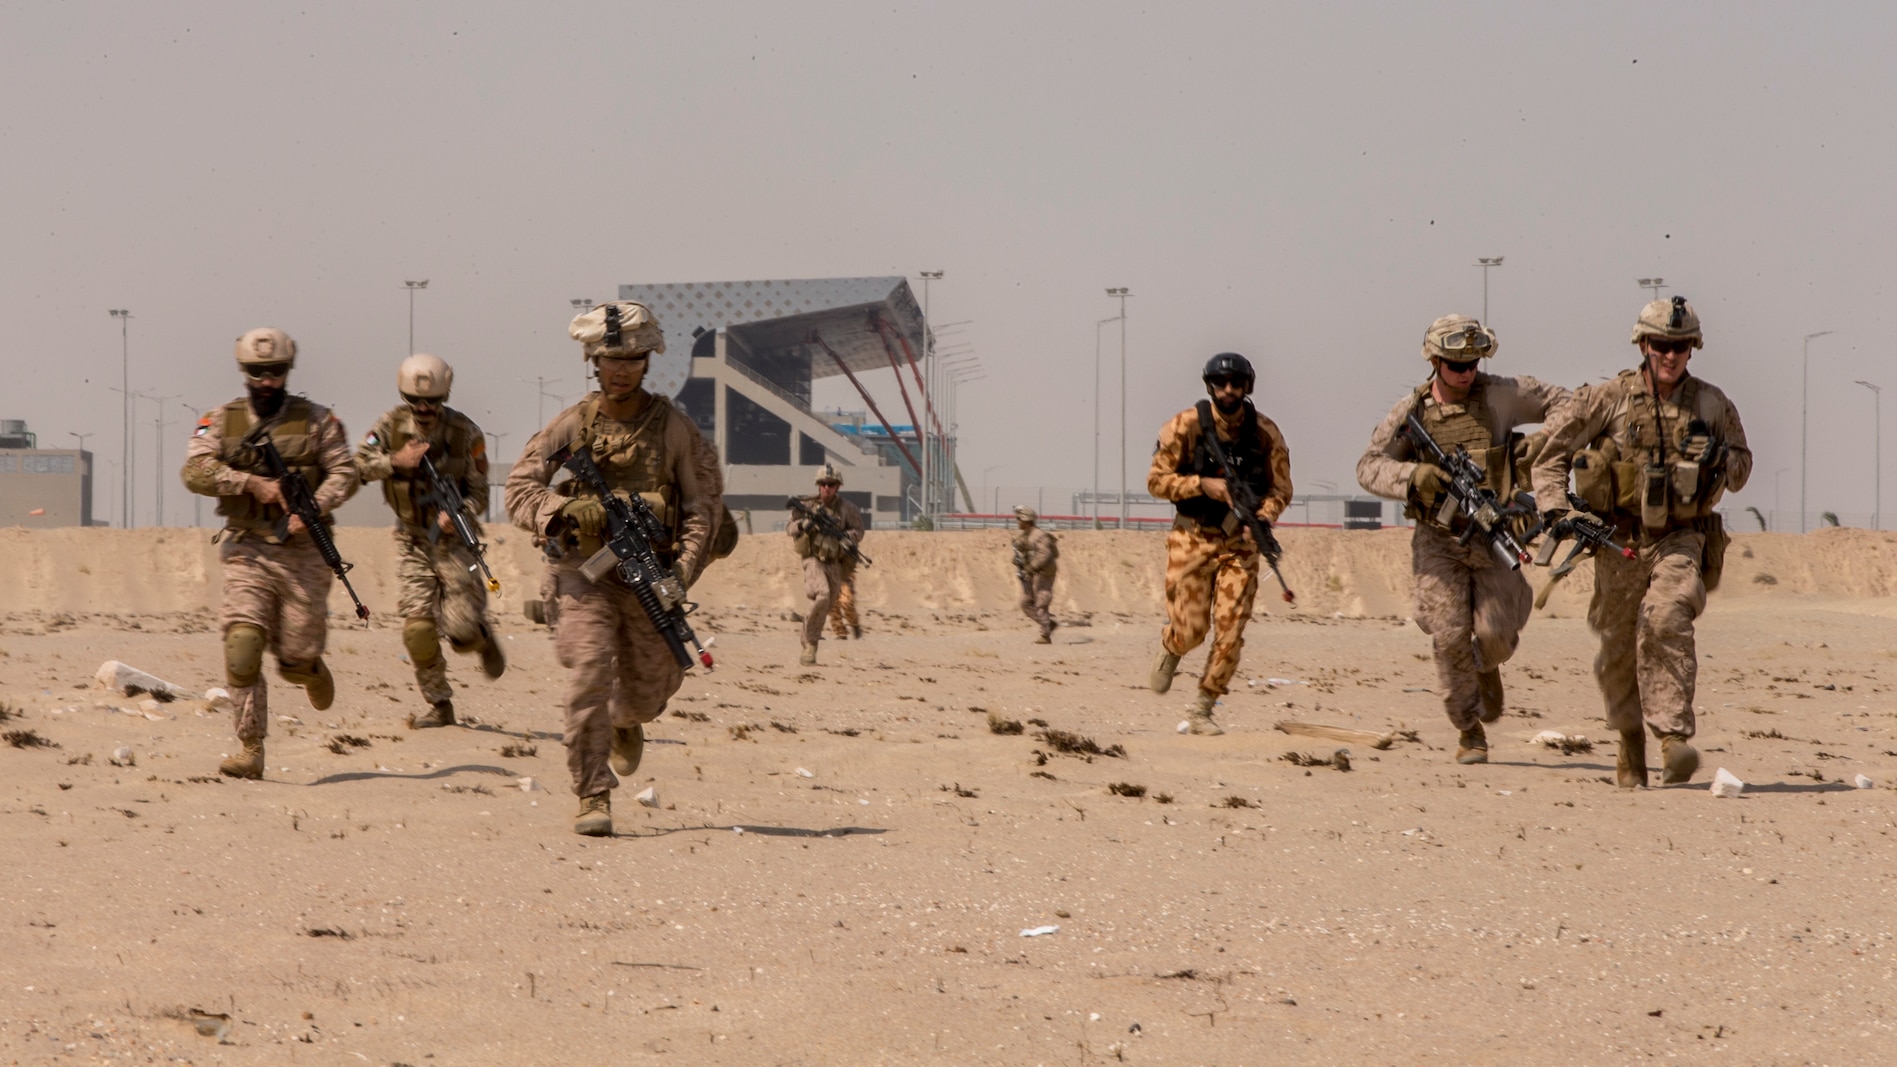 UNDISCLOSED LOCATION, SOUTHWEST ASIA – U.S. Marines with 3rd Battalion 7th Marine Regiment, 1st Marine Division attached to Special Purpose Marine Air-Ground Task Force, Crisis Response-Central Command and Kuwait Armed Forces service members rush to their objective during exercise Invincible Sentry August 8, 2018. SPMAGTF-CR-CC works with partner nations on maintaining regional security through joint operations and exercises. (U.S. Marine Corps photo by Cpl. Gabino Perez)